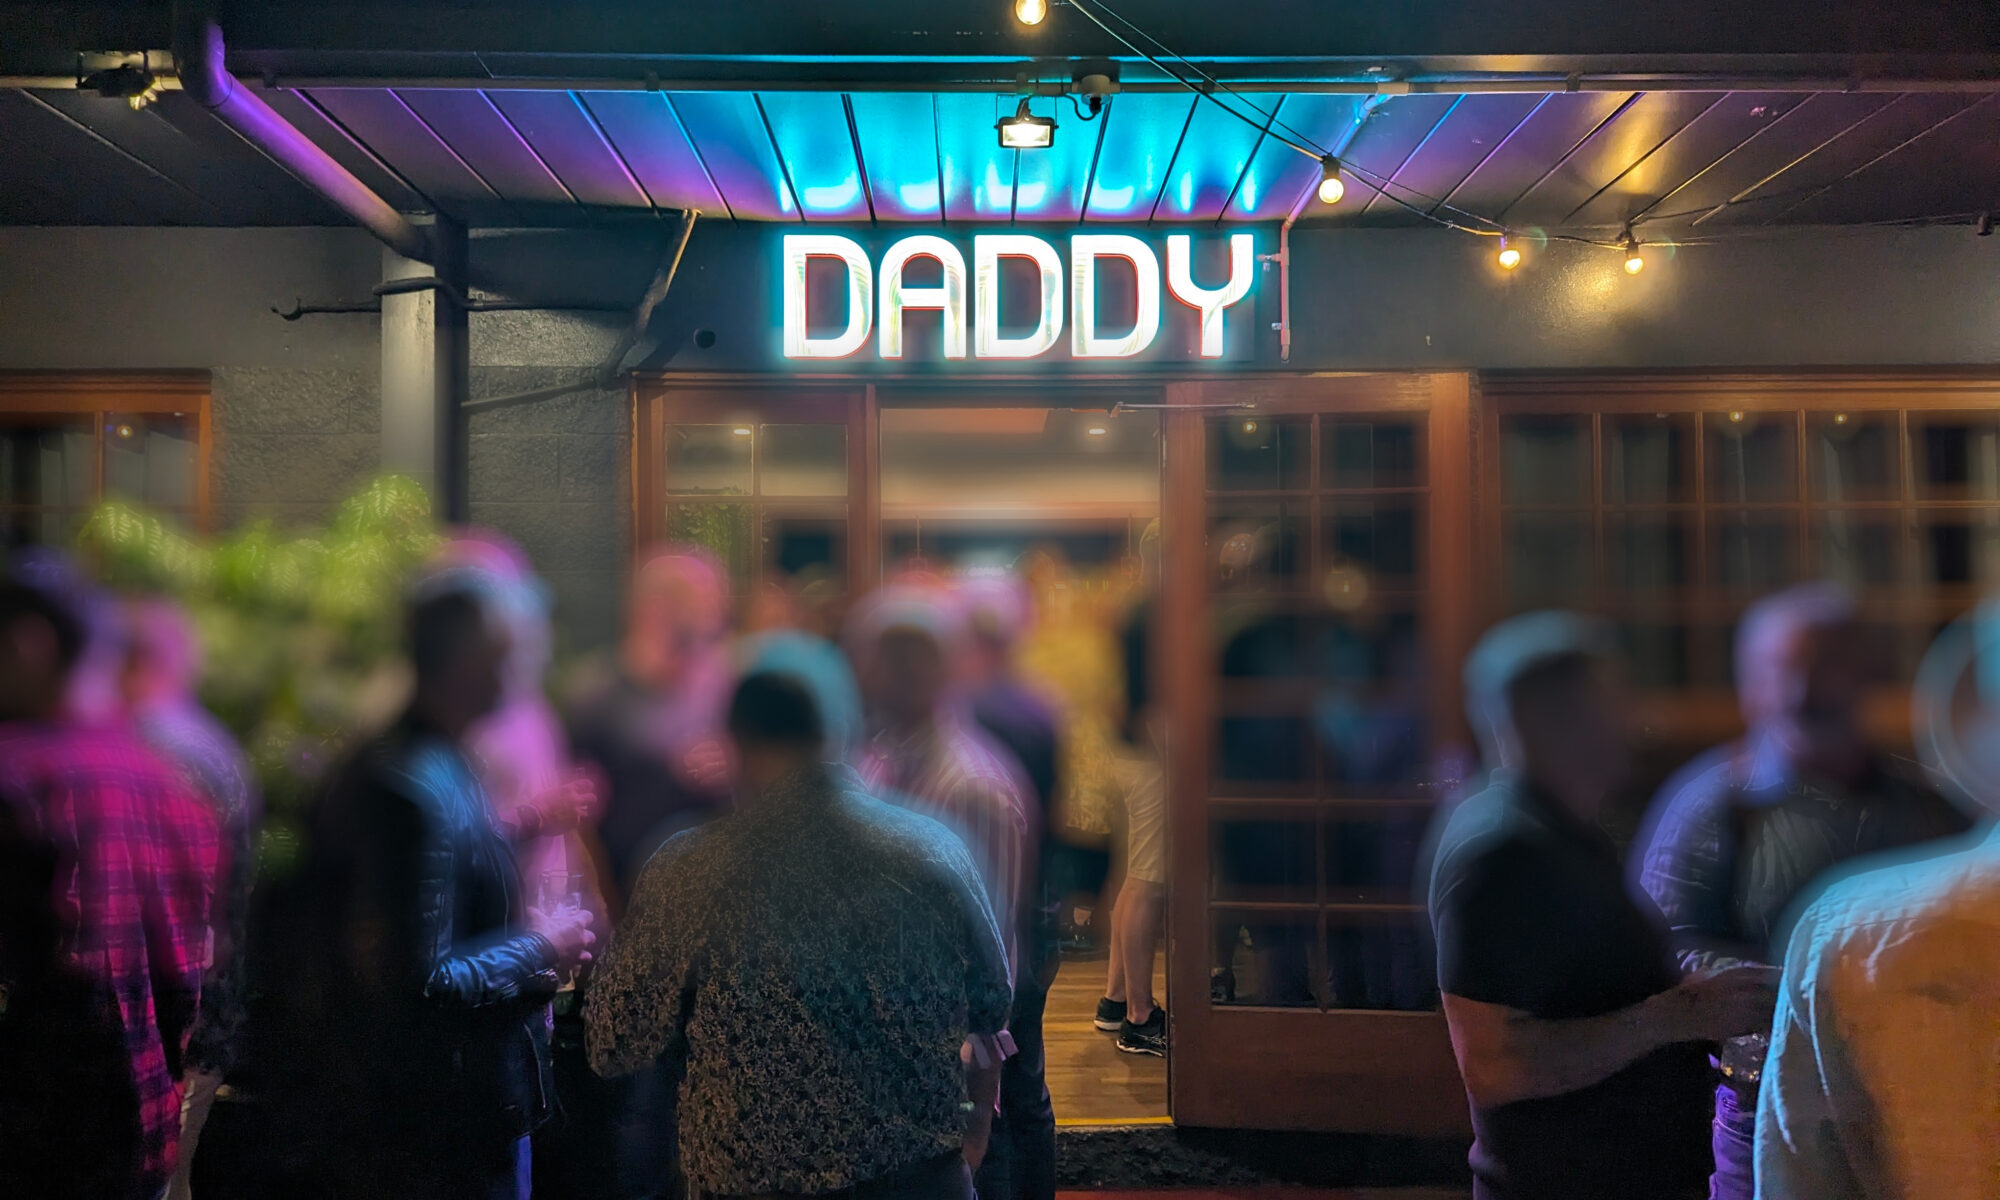 A bar with a neon sign out the front reads "Daddy", and a bunch of people stand around out the front. Their faces are blurred because, y'know, they didn't ask to have their photo taken.